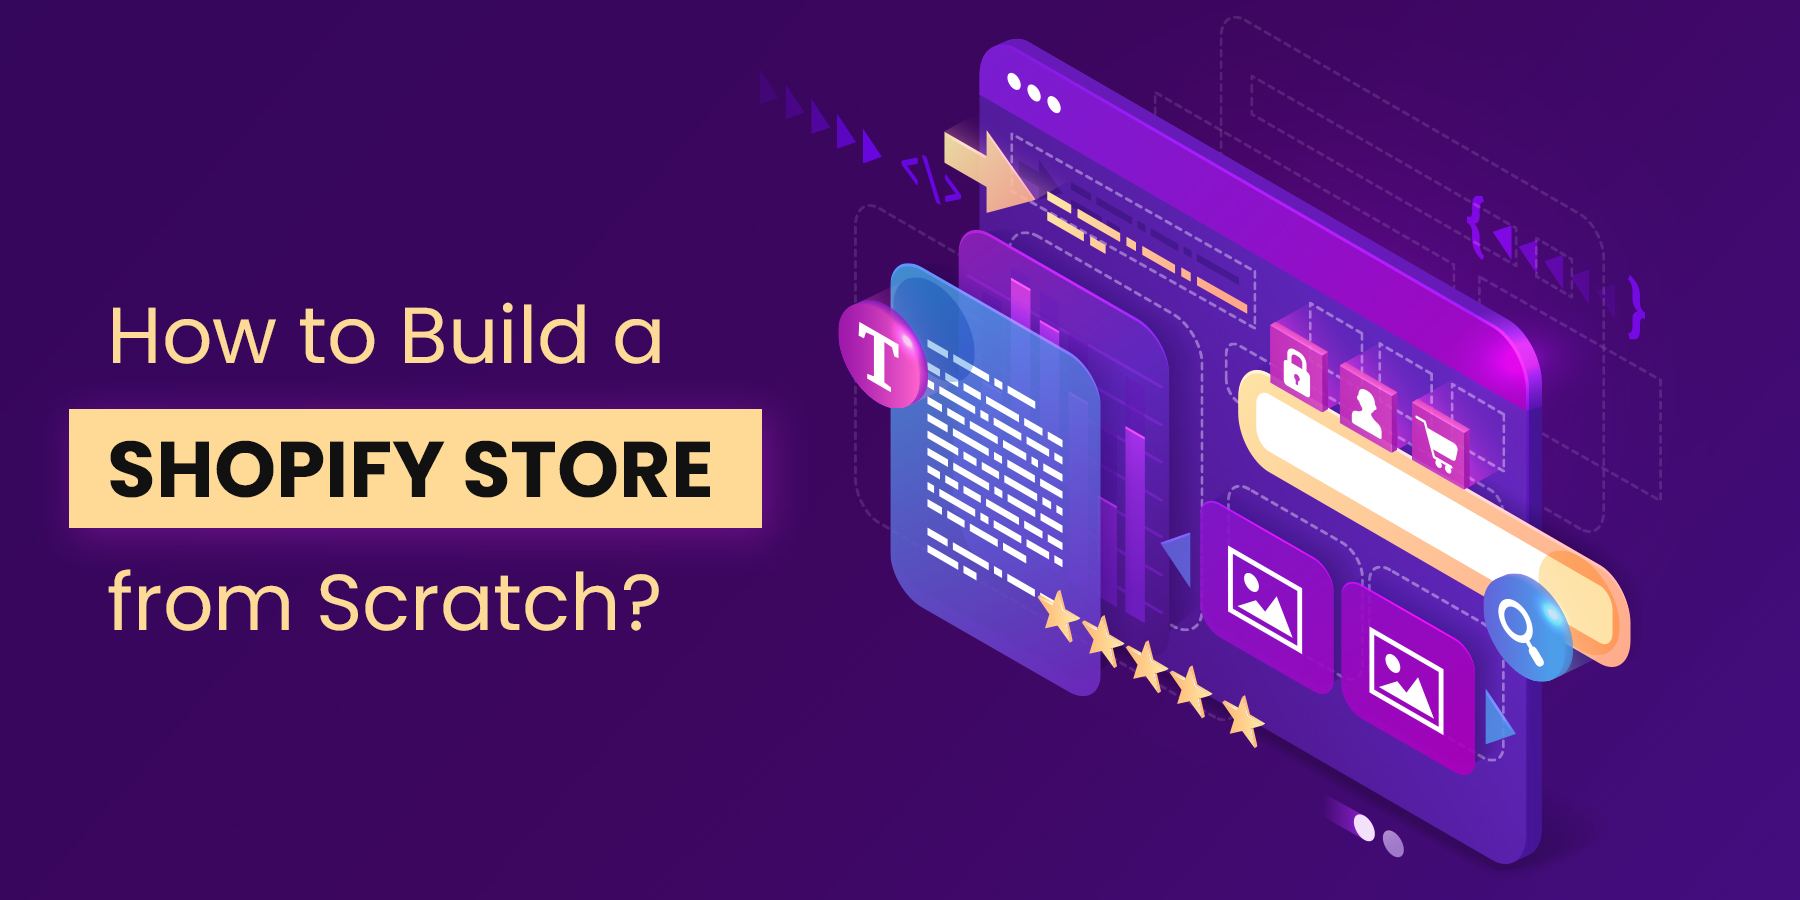 How to Build a Shopify Store from Scratch